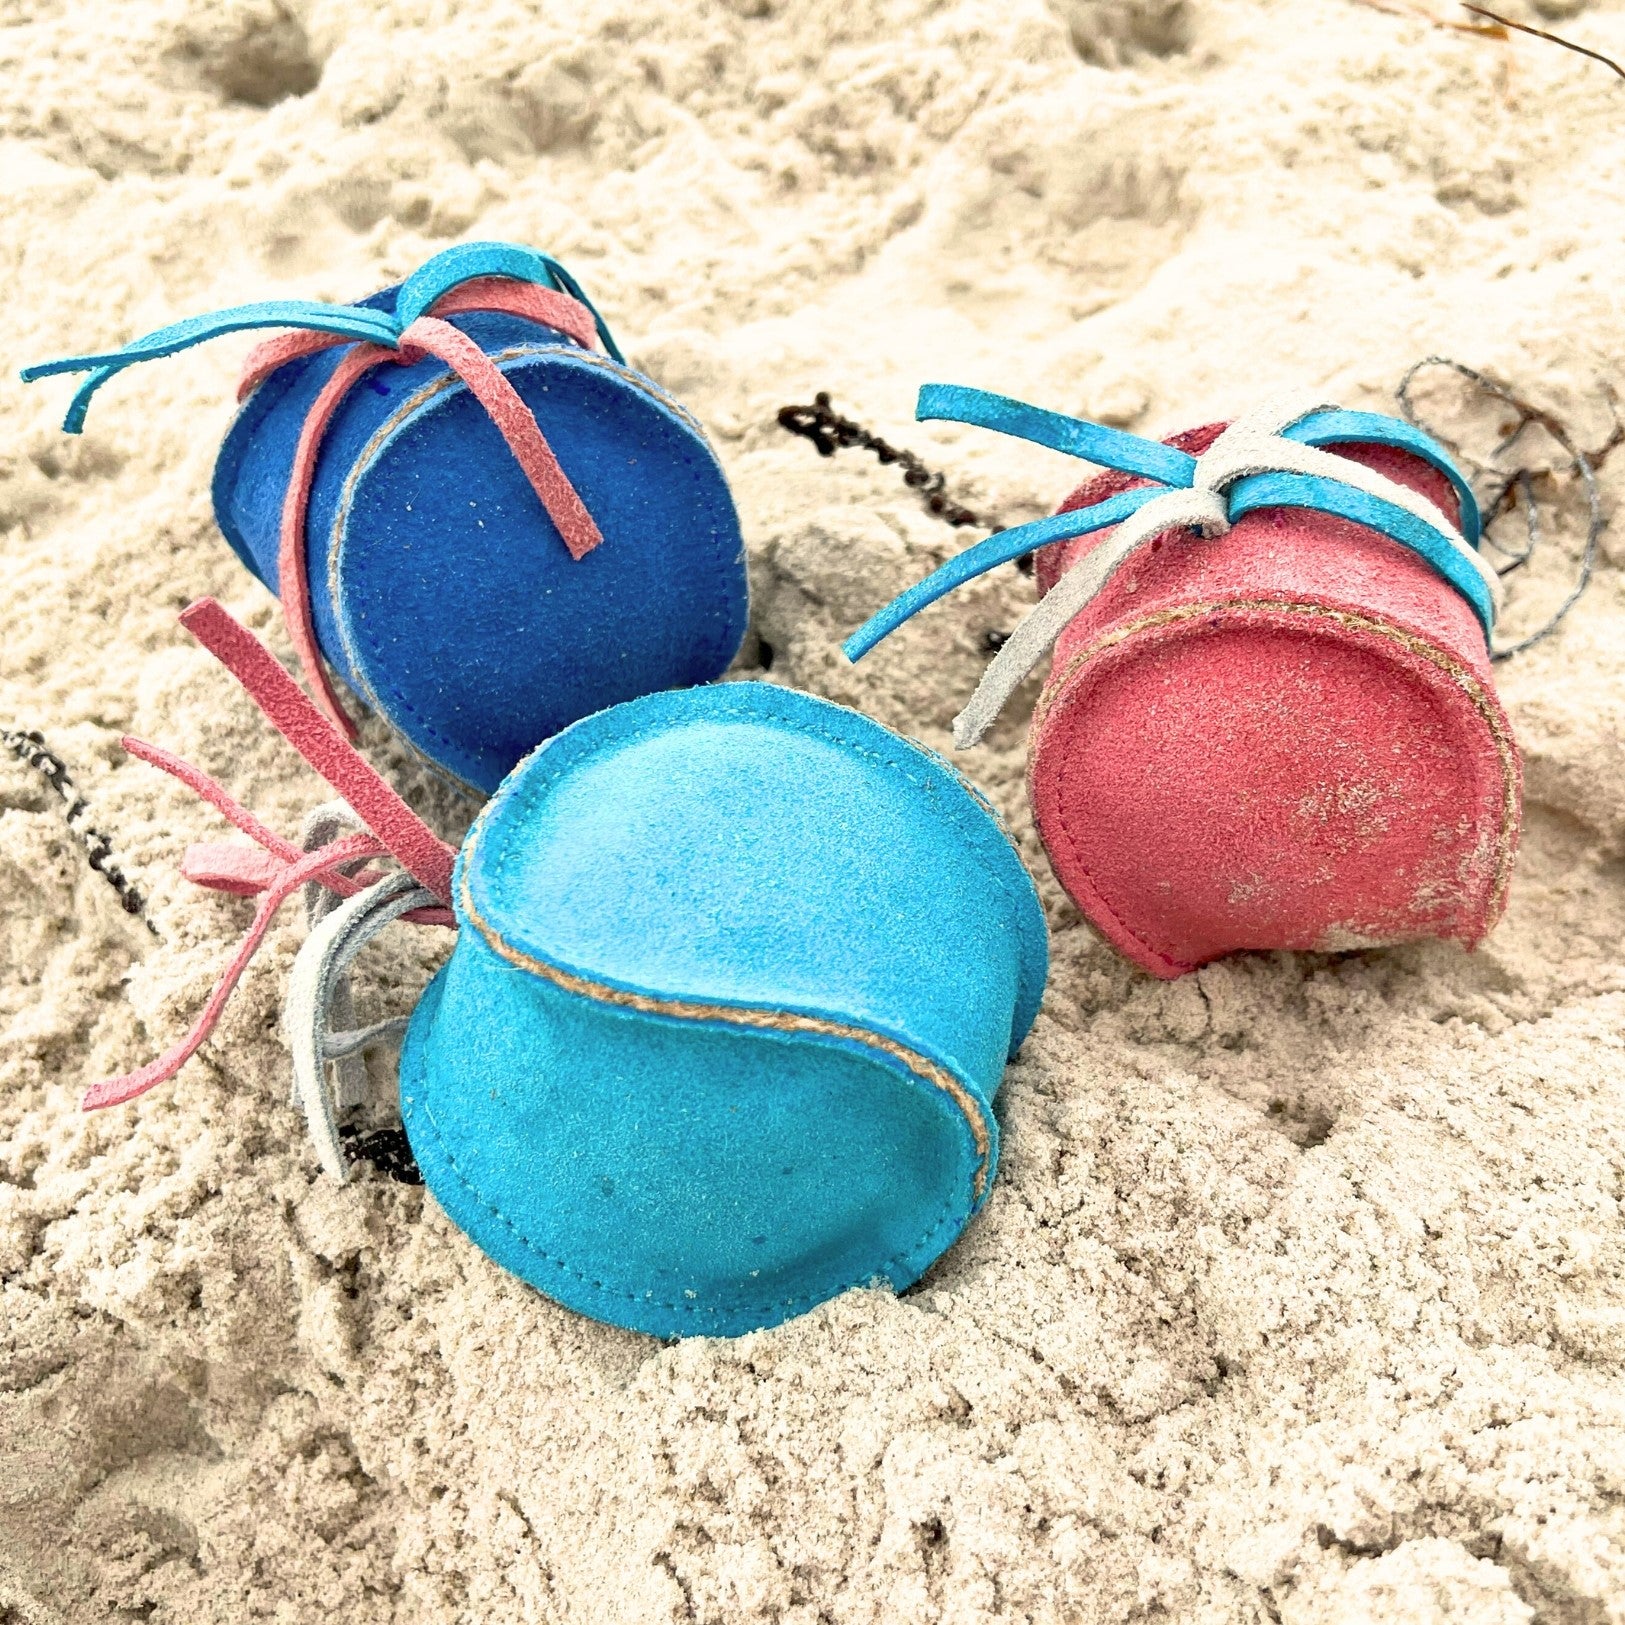 Three colorful compostable Bobble Sea Urchin juggling balls with visible sand grains, two blue and one pink, are resting on a sandy surface, their laces intertwined, suggesting a playful break at the beach.